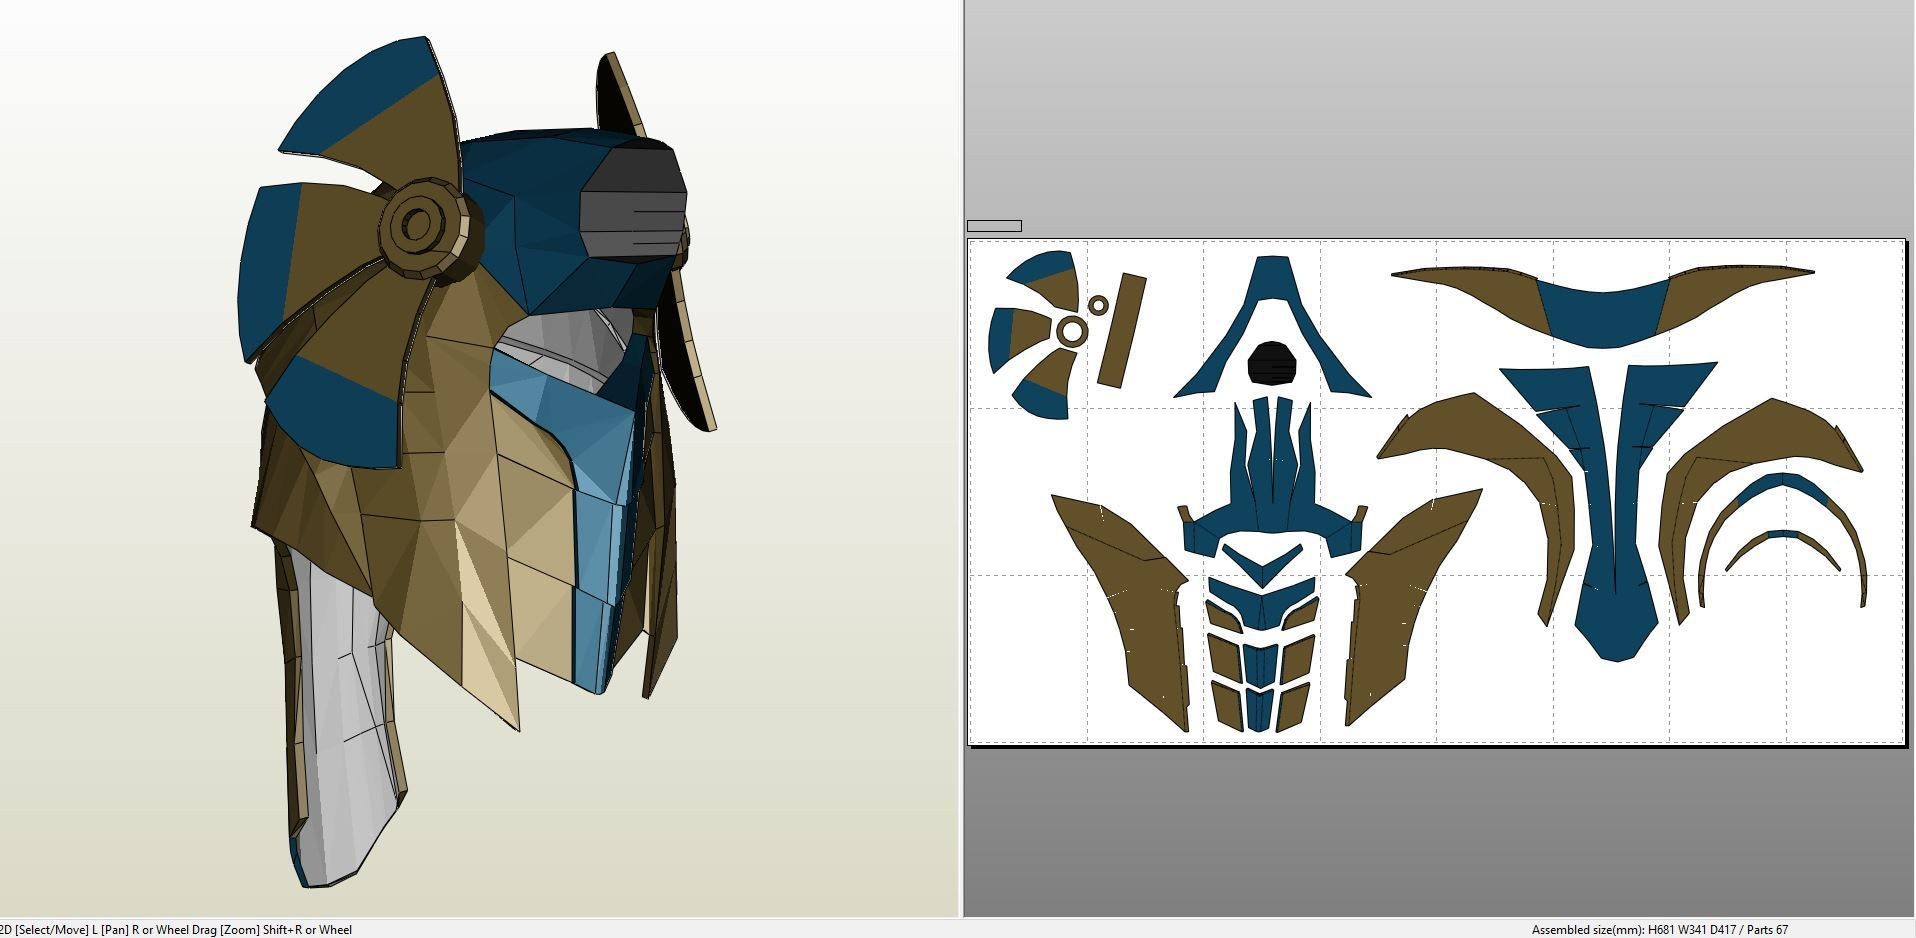 Power Rangers Papercraft Papercraft Pdo File Template for Doktor who Cyberslave Helmet